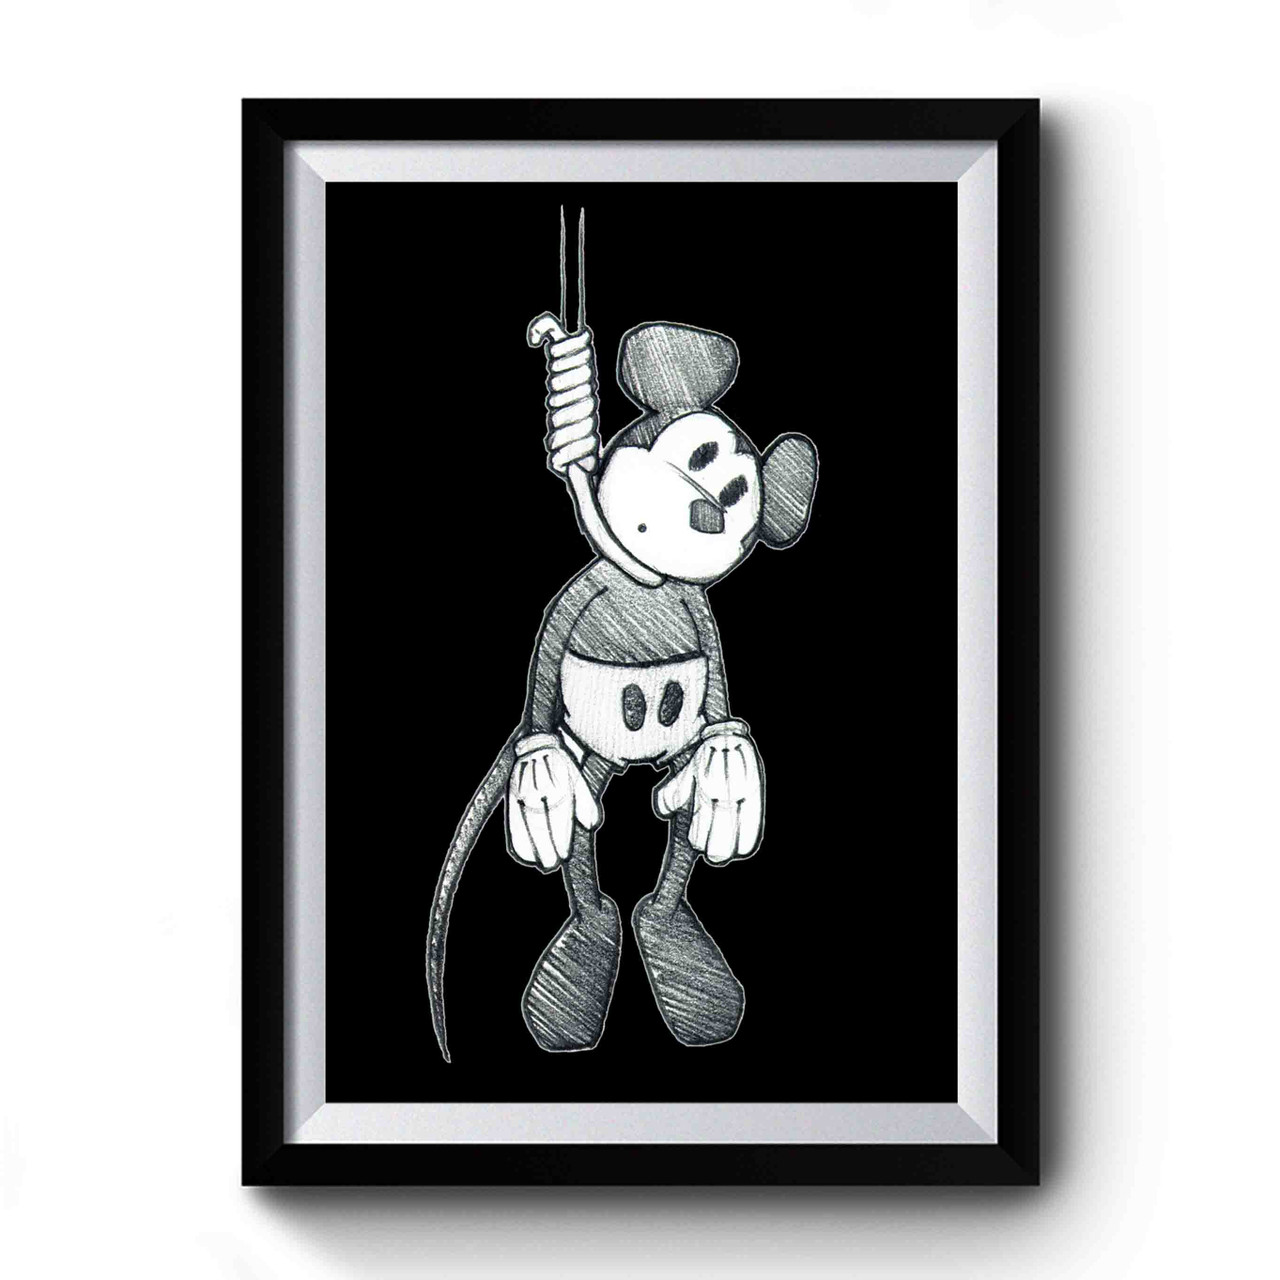  Wall Art MK Mouse Premium Poster Print Great Gift Idea for Her  or Him Hanging Picture Decor For Home or Room (12x18): Posters & Prints